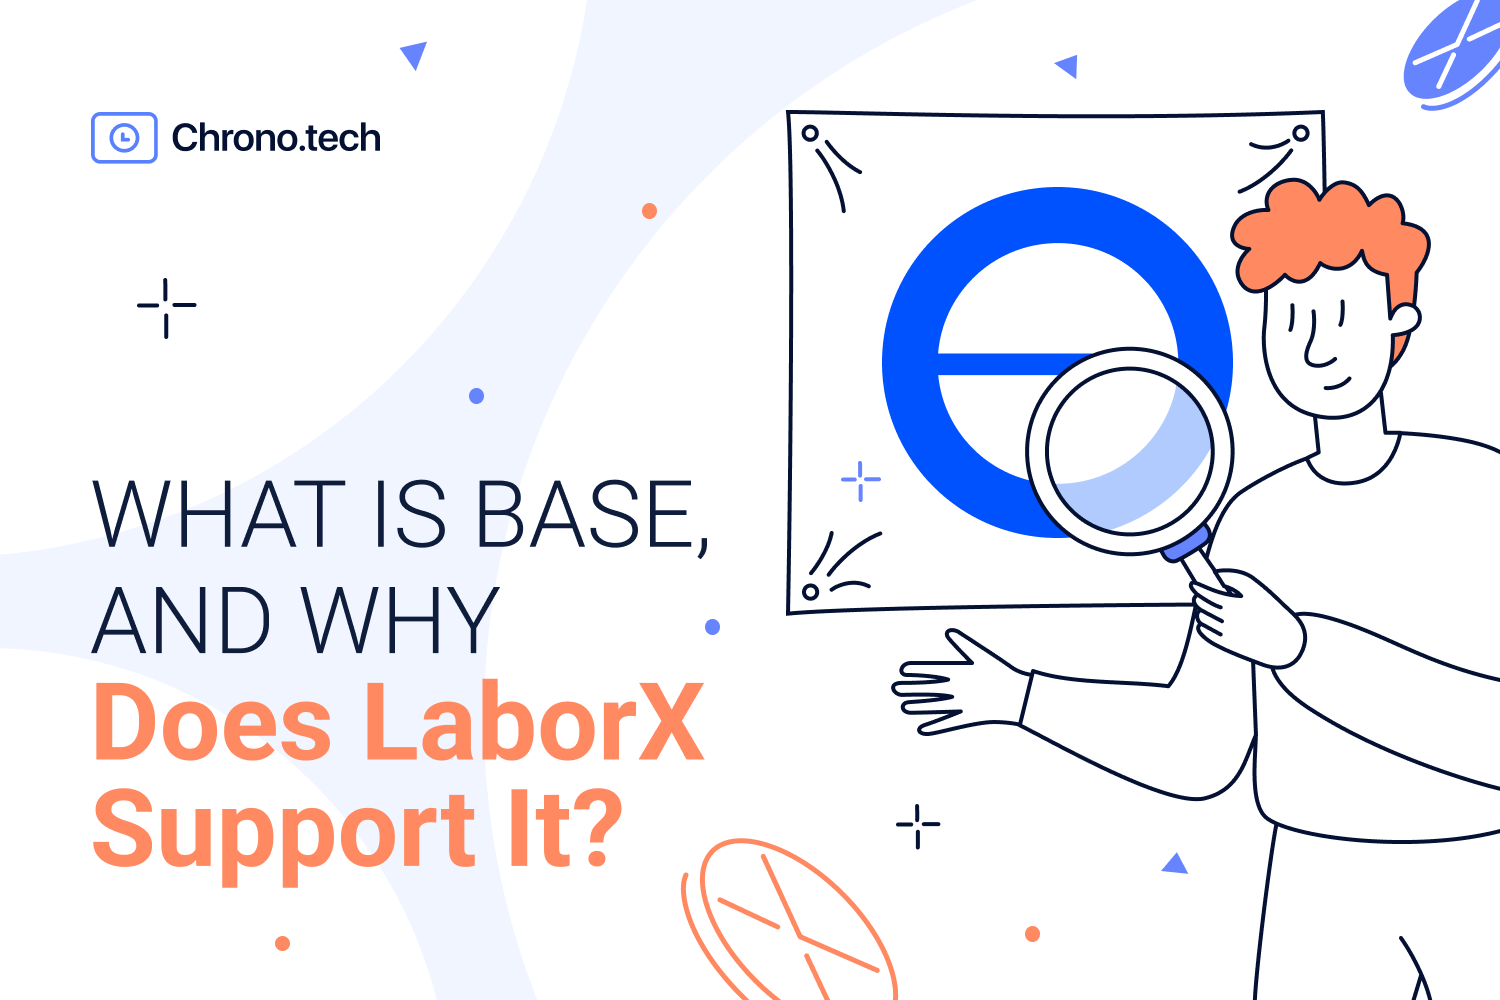 What Is Base, And Why Does LaborX Support It?